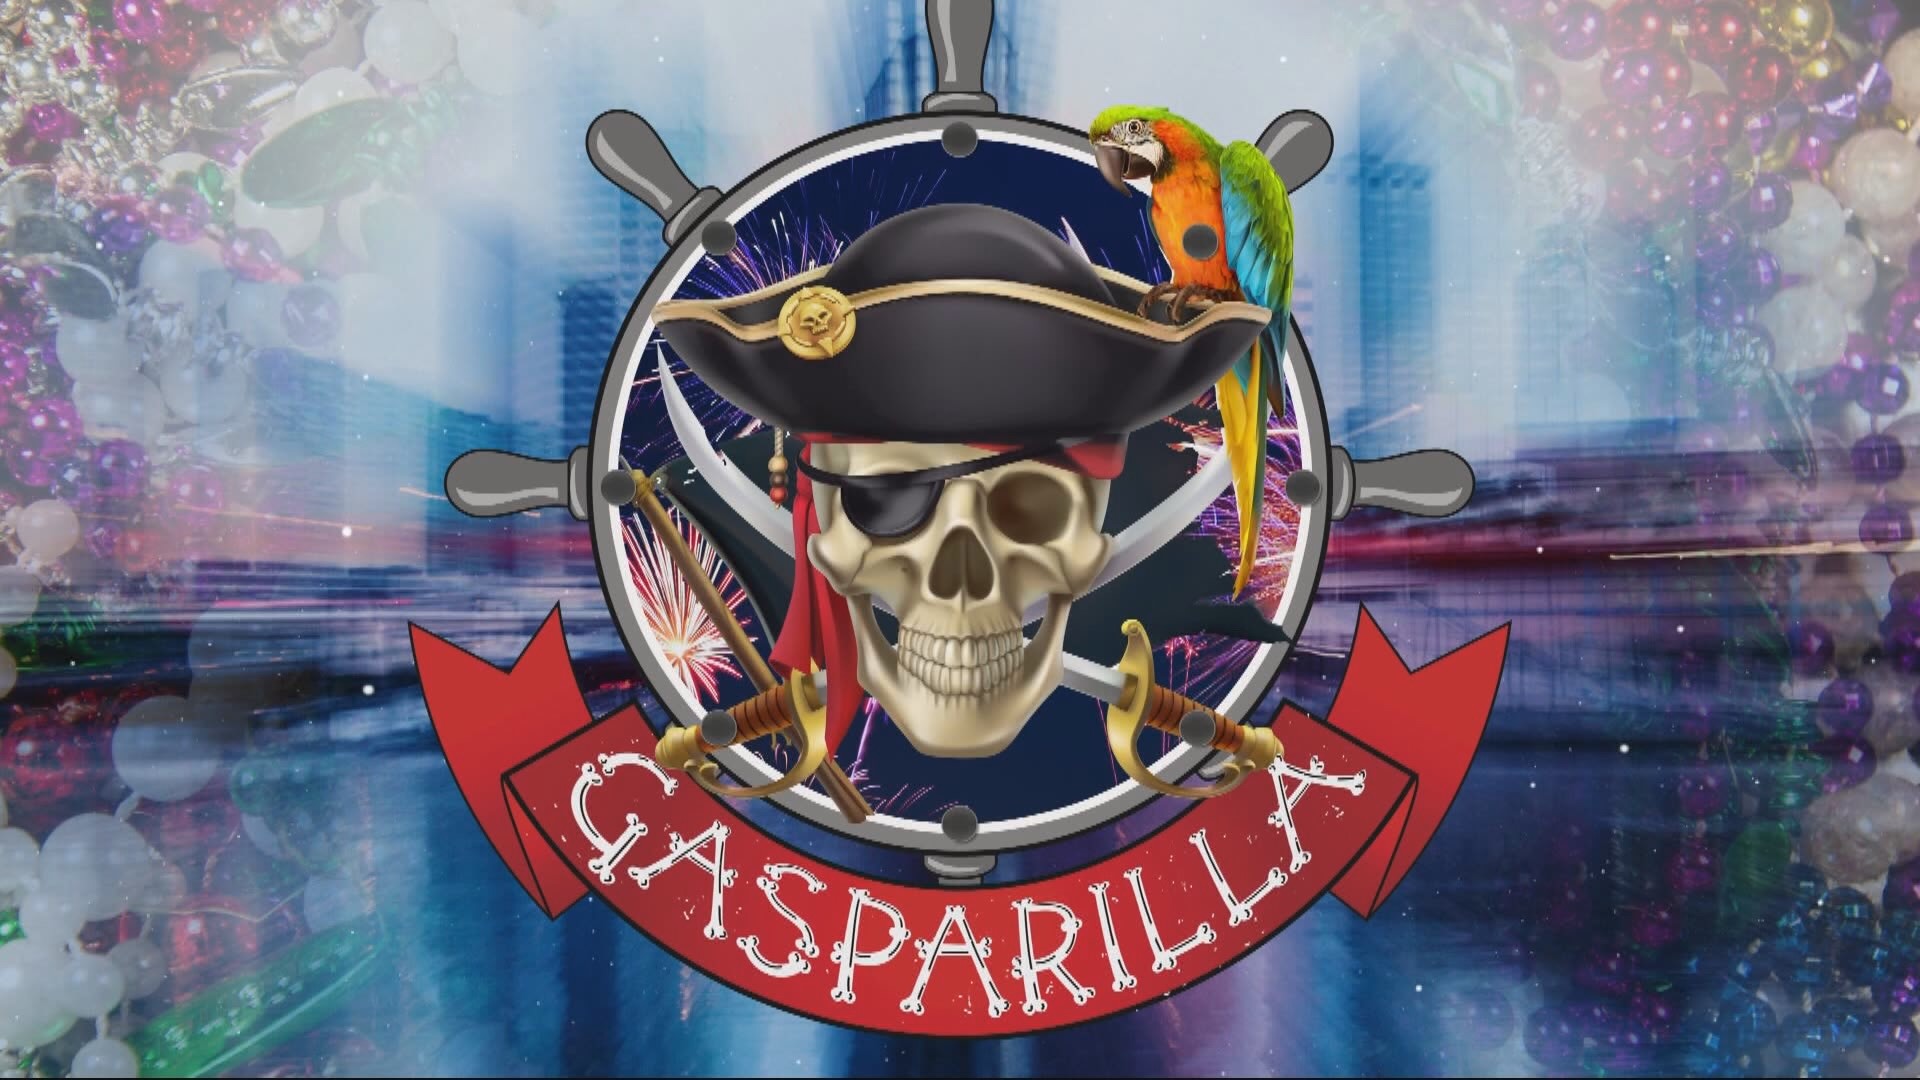 Gasparilla 2023: History of, behind the scenes looks, schedule of events and more | wtsp.com